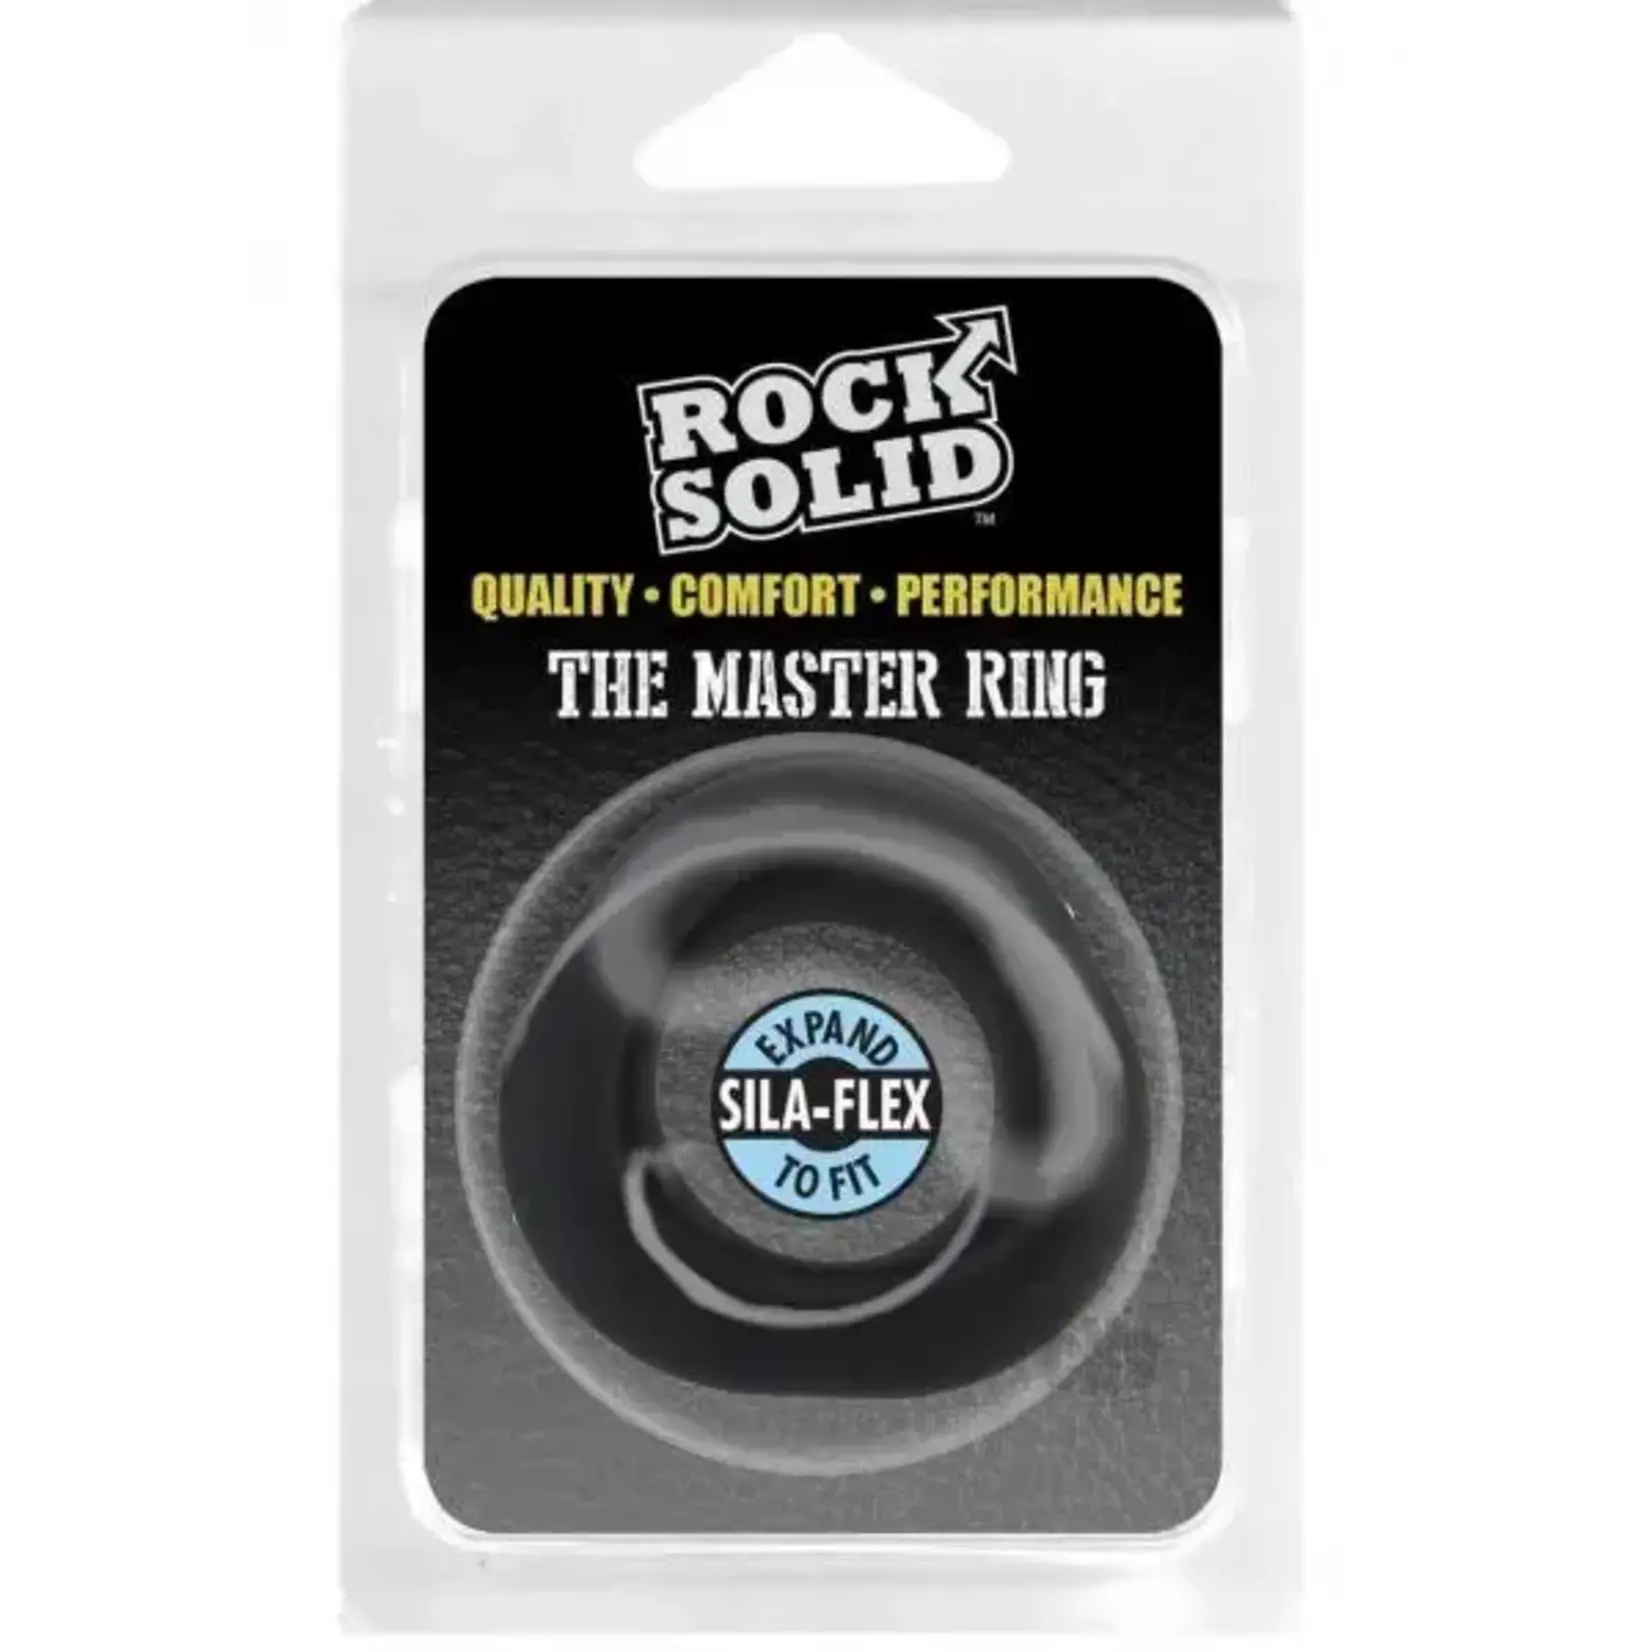 ROCK SOLID - THE MASTER RING BLACK